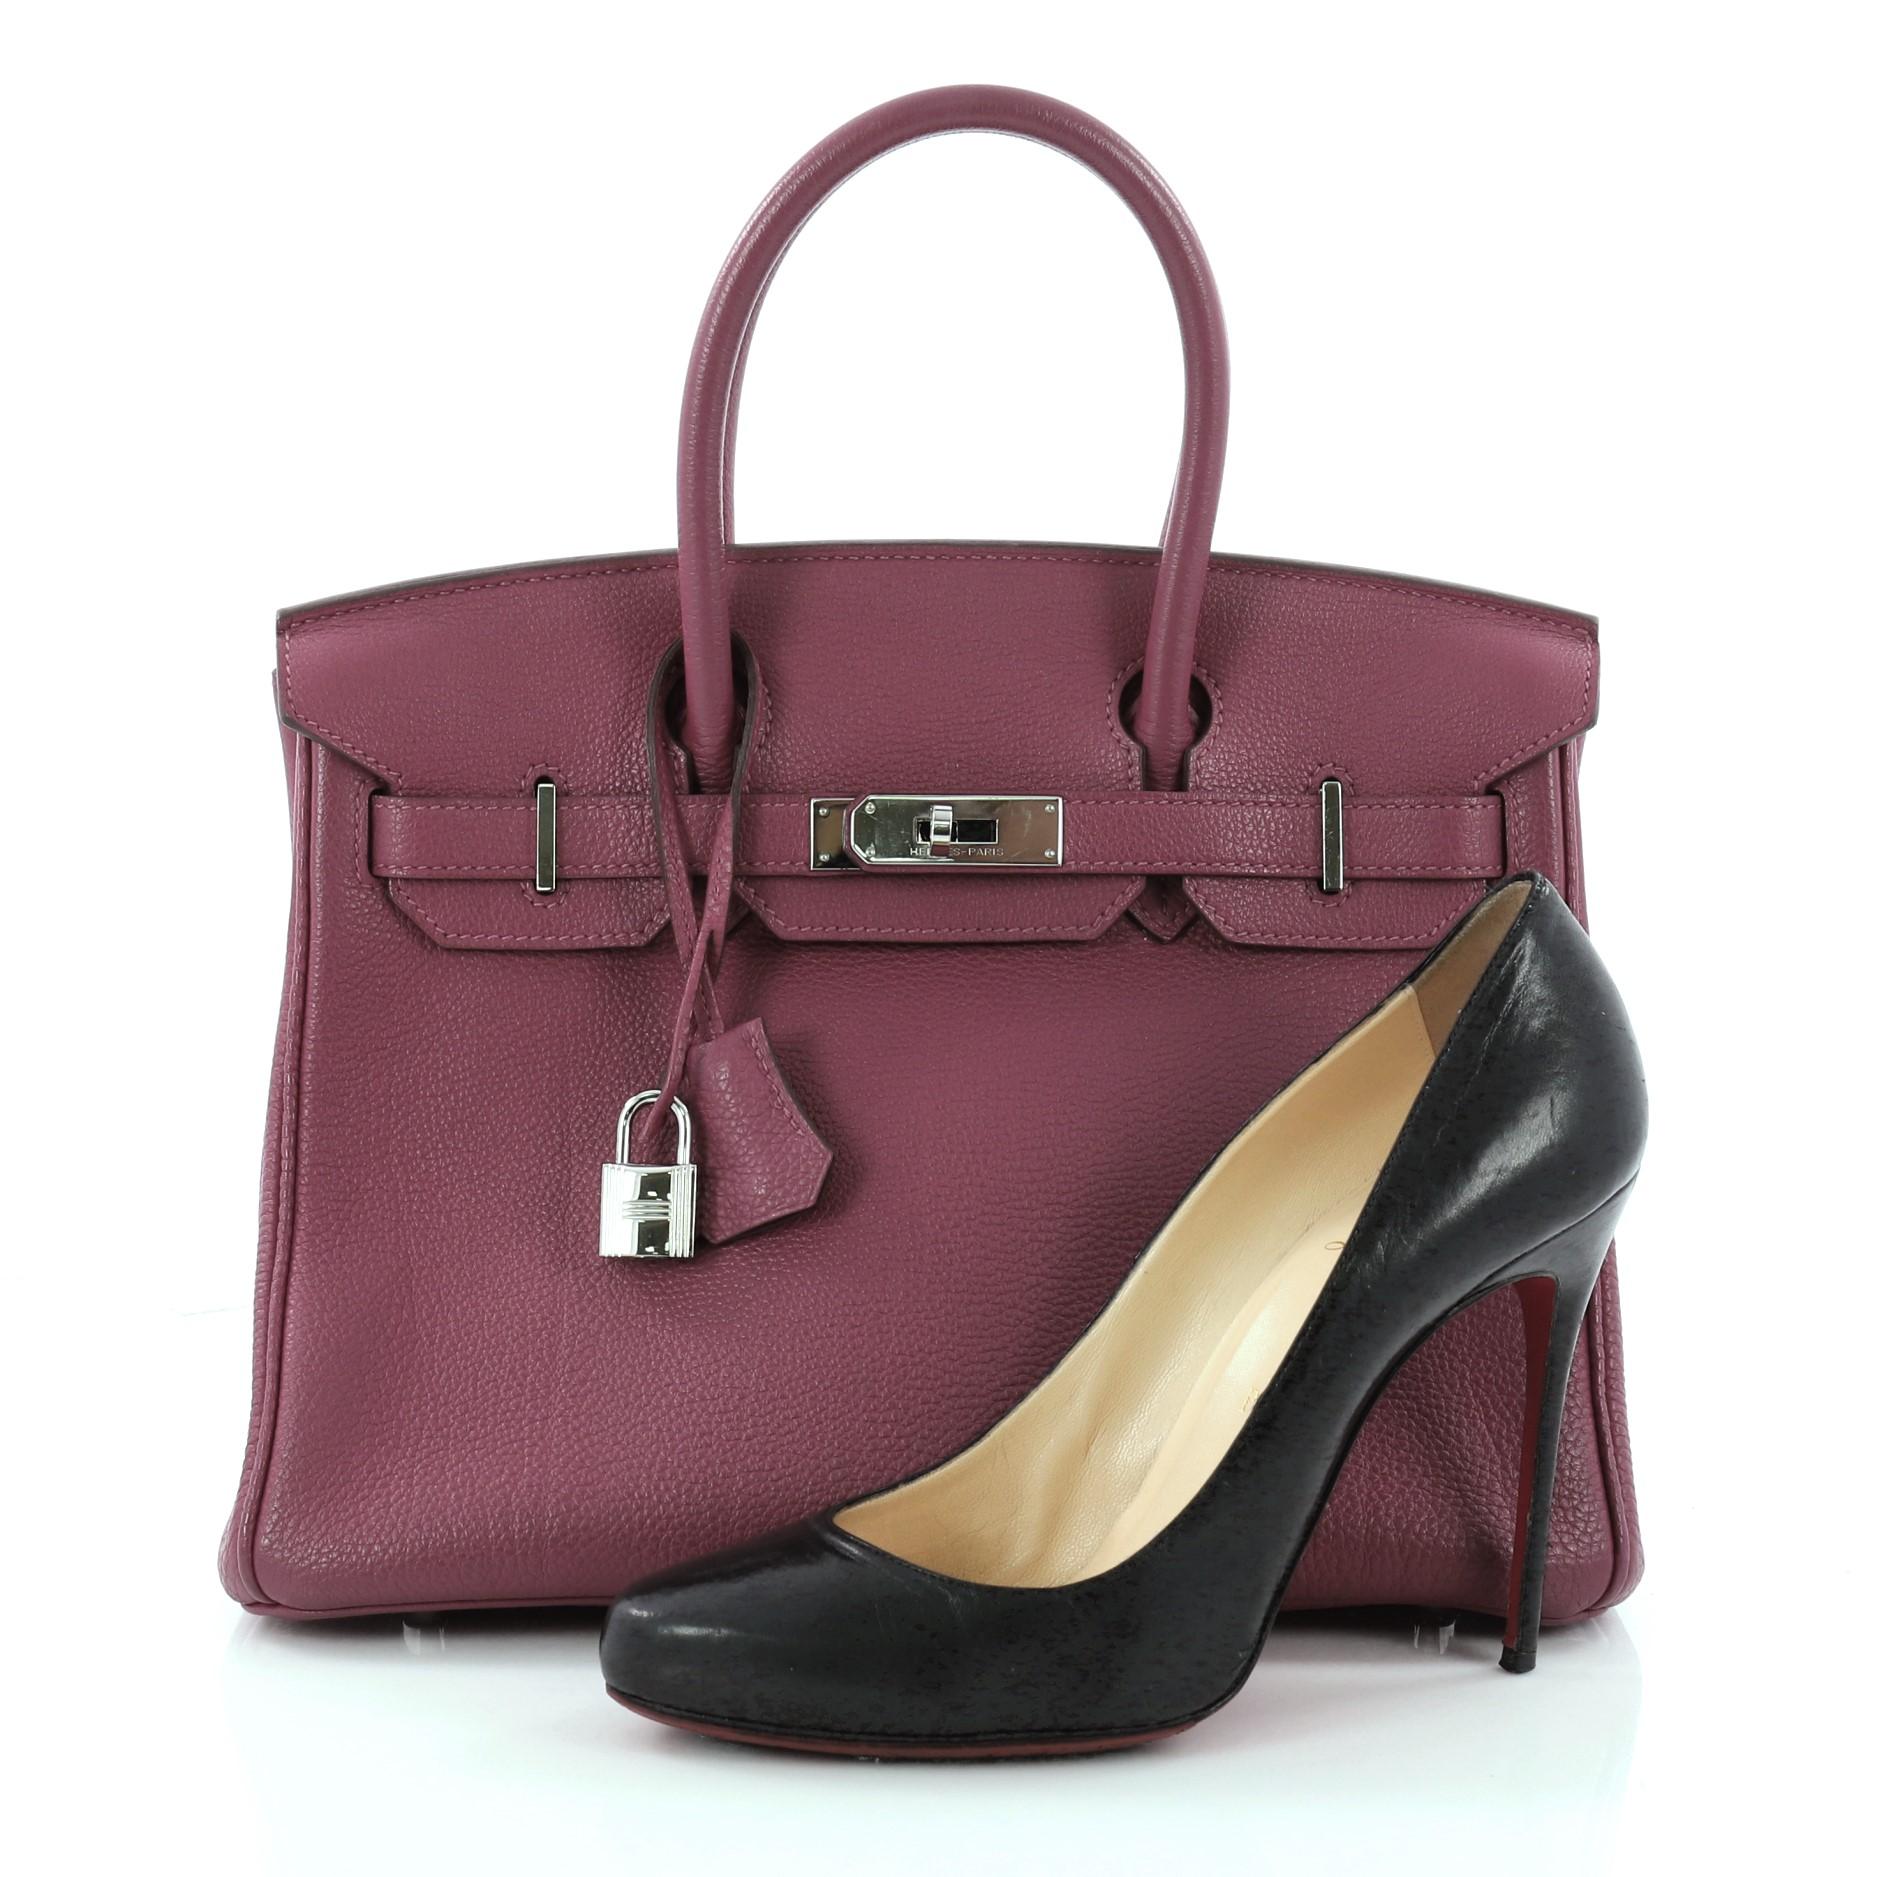 This authentic Hermes Birkin Handbag Cyclamen Togo with Palladium Hardware 30 is synonymous to traditional Hermes luxury. Crafted with sturdy, scratch-resistant Cyclamen purple Togo leather, this eye-catching luxurious tote is accented with polished